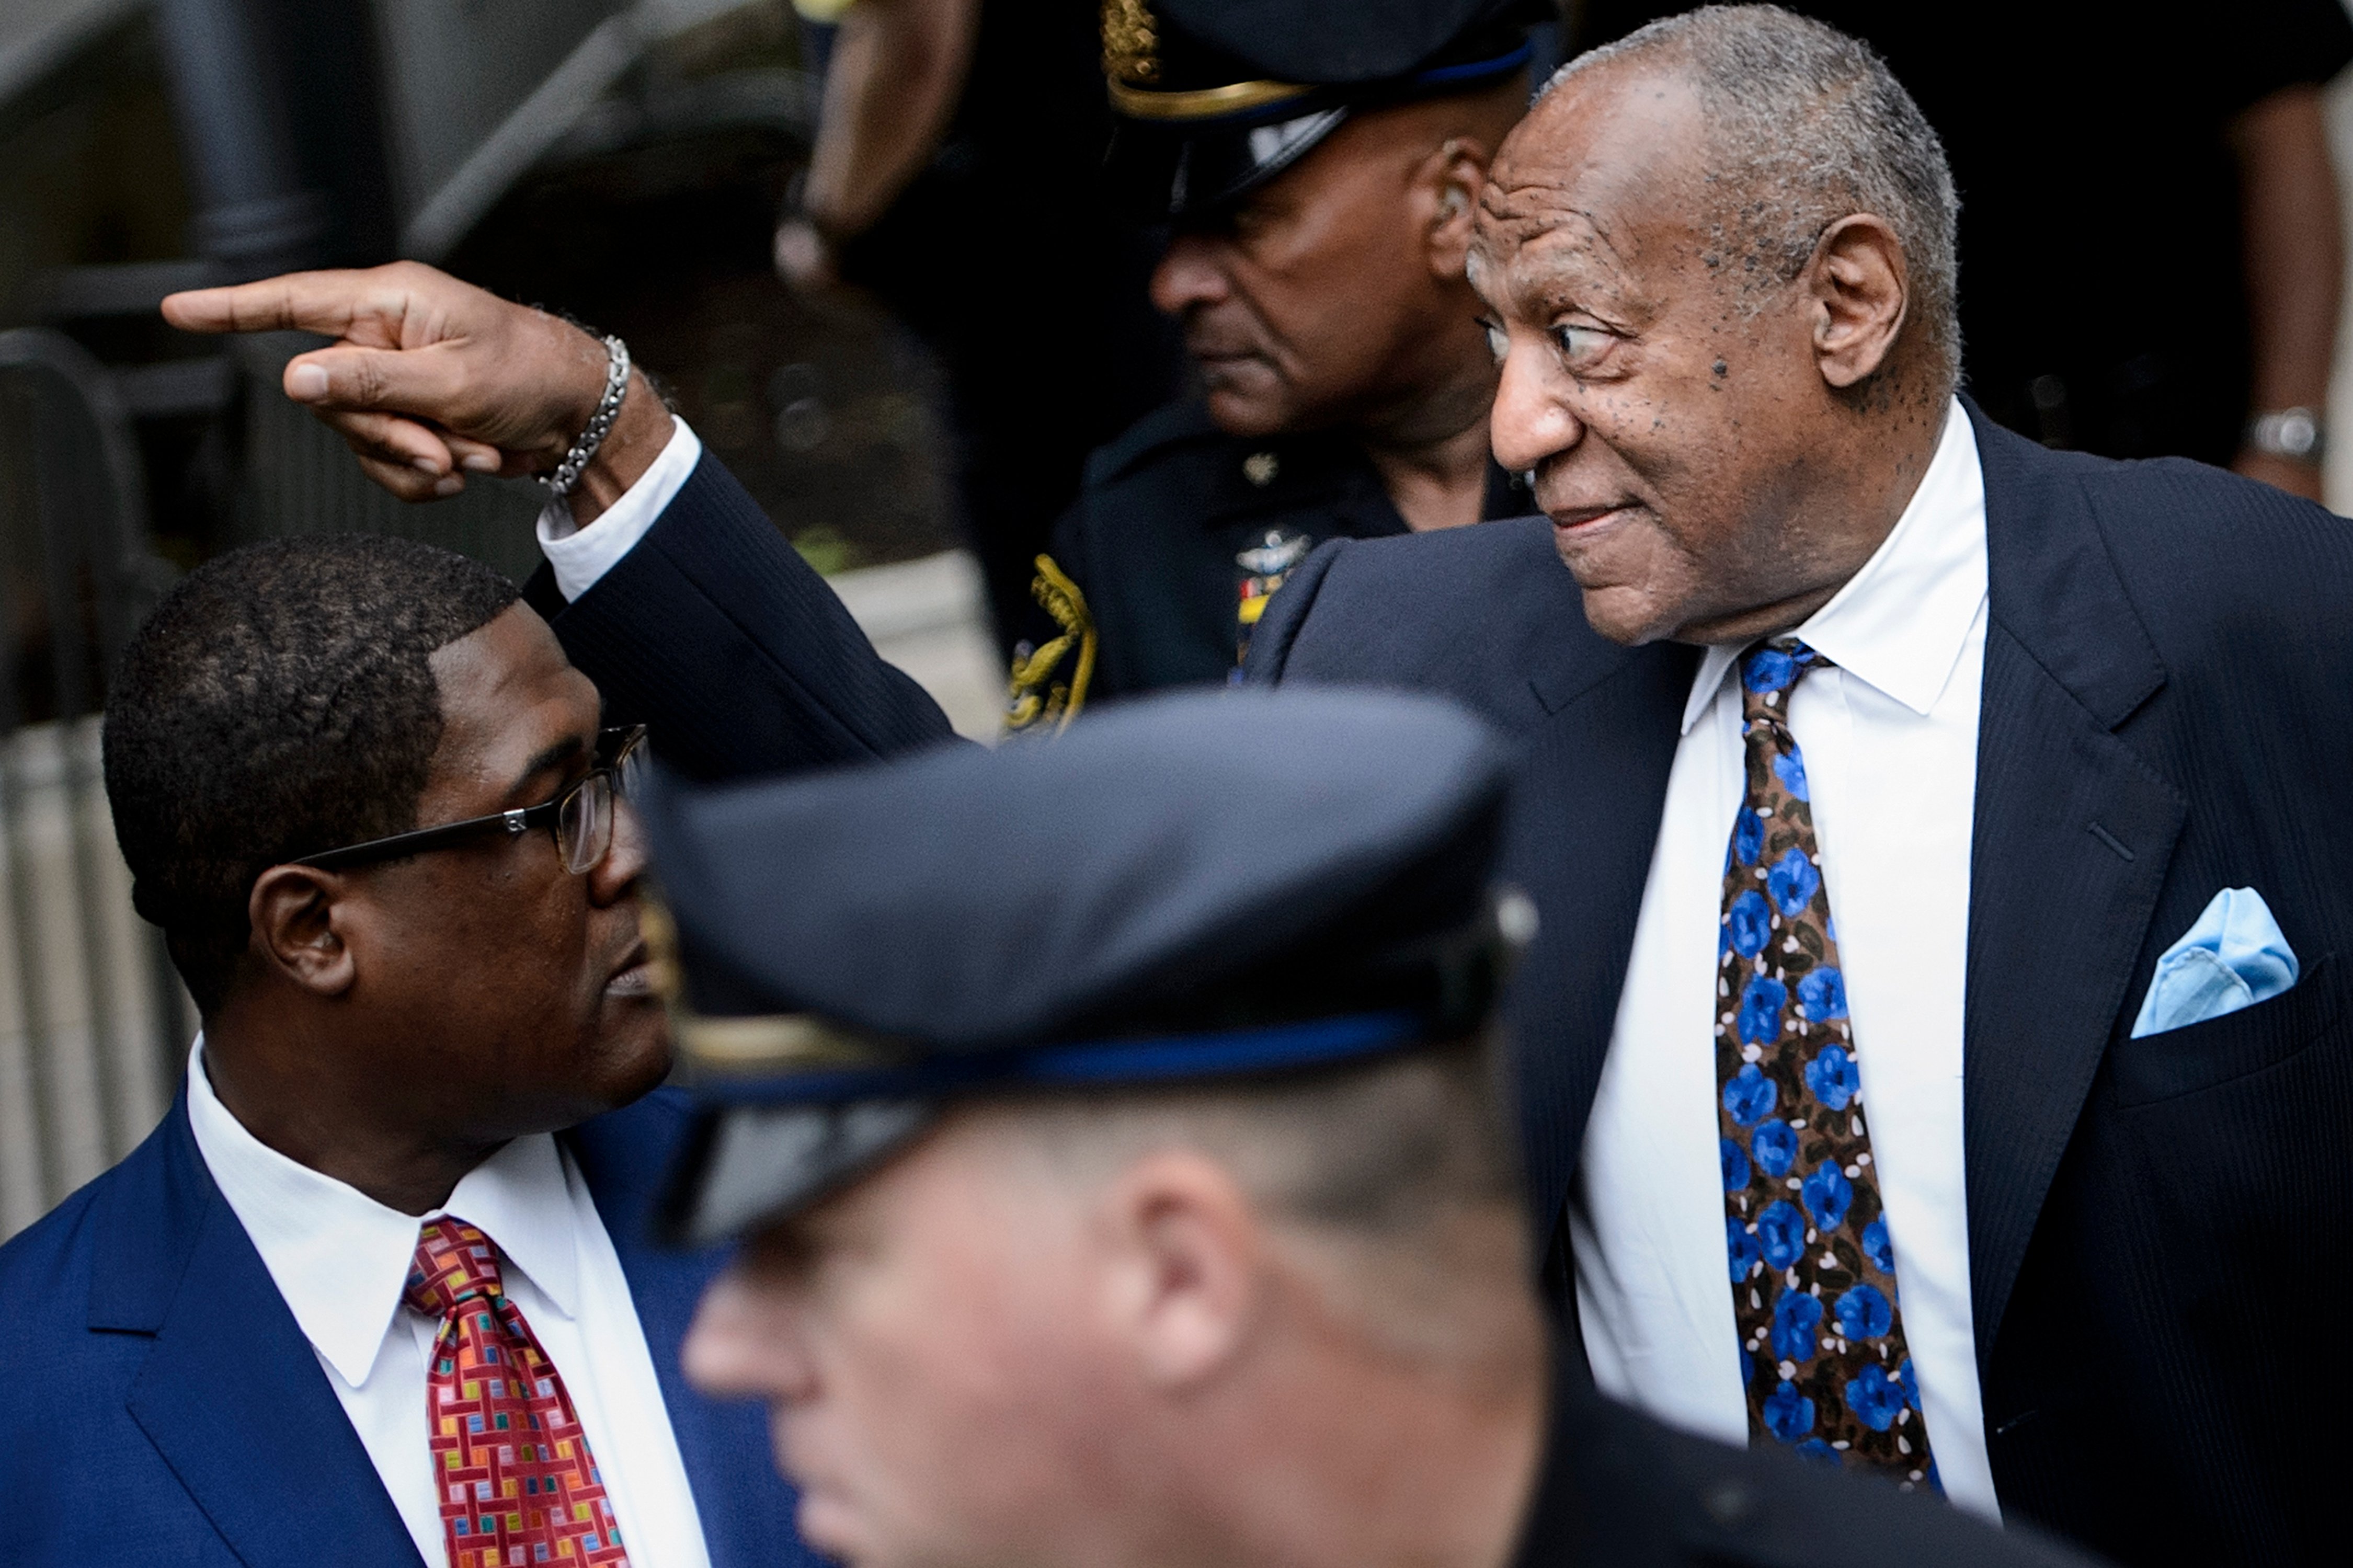 US actor Bill Cosby arrives at court on September 24, 2018 in Norristown, Pennsylvania to face sentencing for his sexual assault case. (Photo credit BRENDAN SMIALOWSKI/AFP/Getty Images)